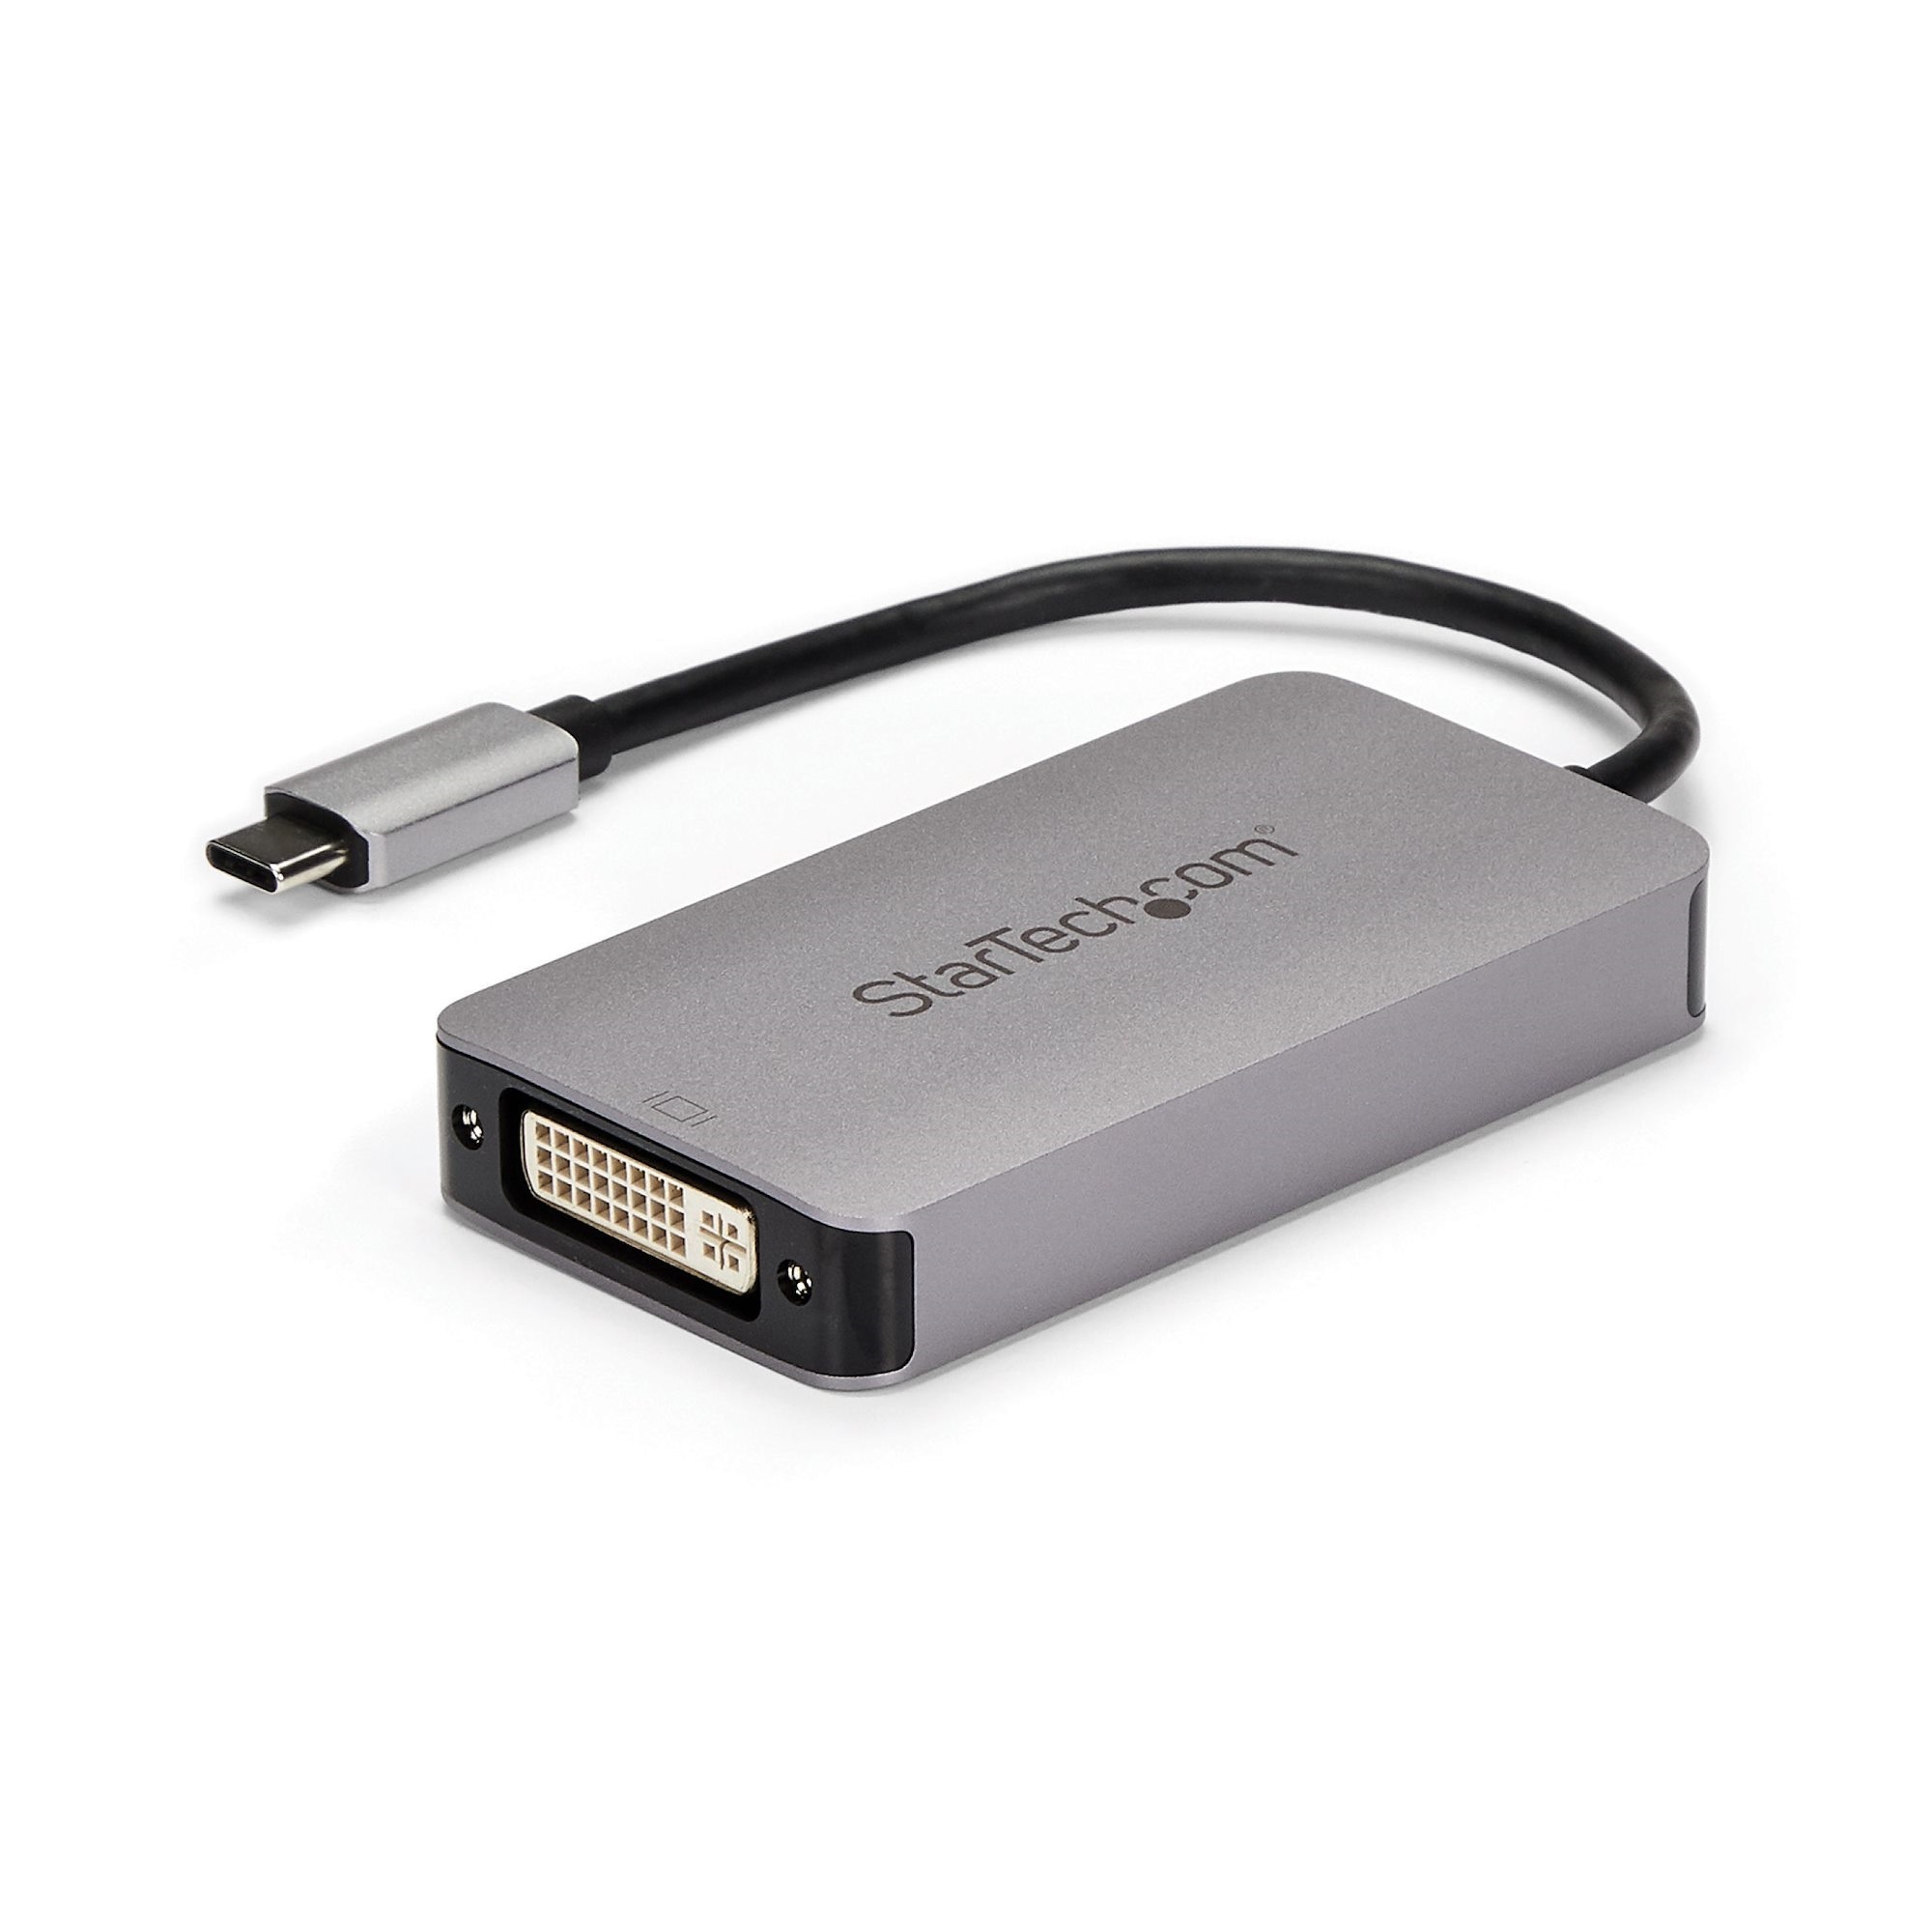 Startech USB-C to DVI Adapter - Dual-Link Connectivity